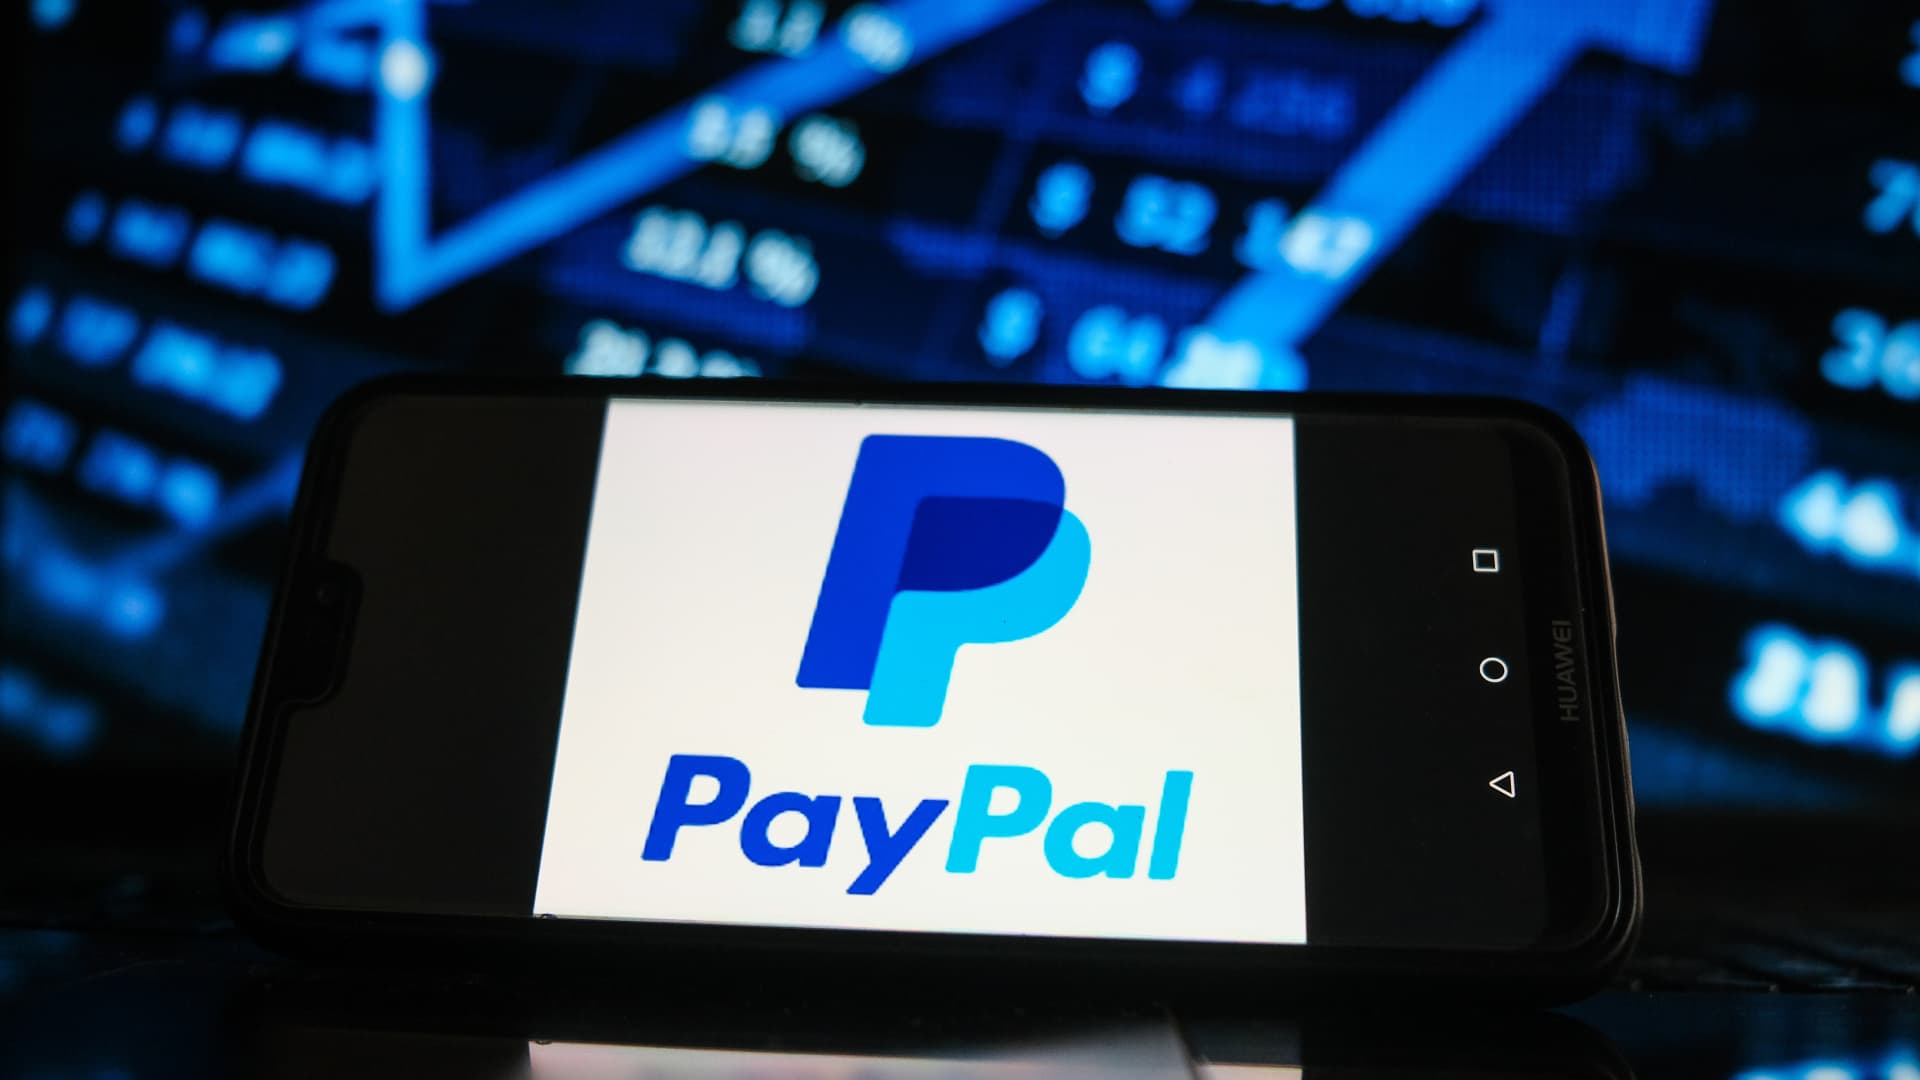 The PayPal logo displayed on a smartphone screen with a stock market graphic in the background.